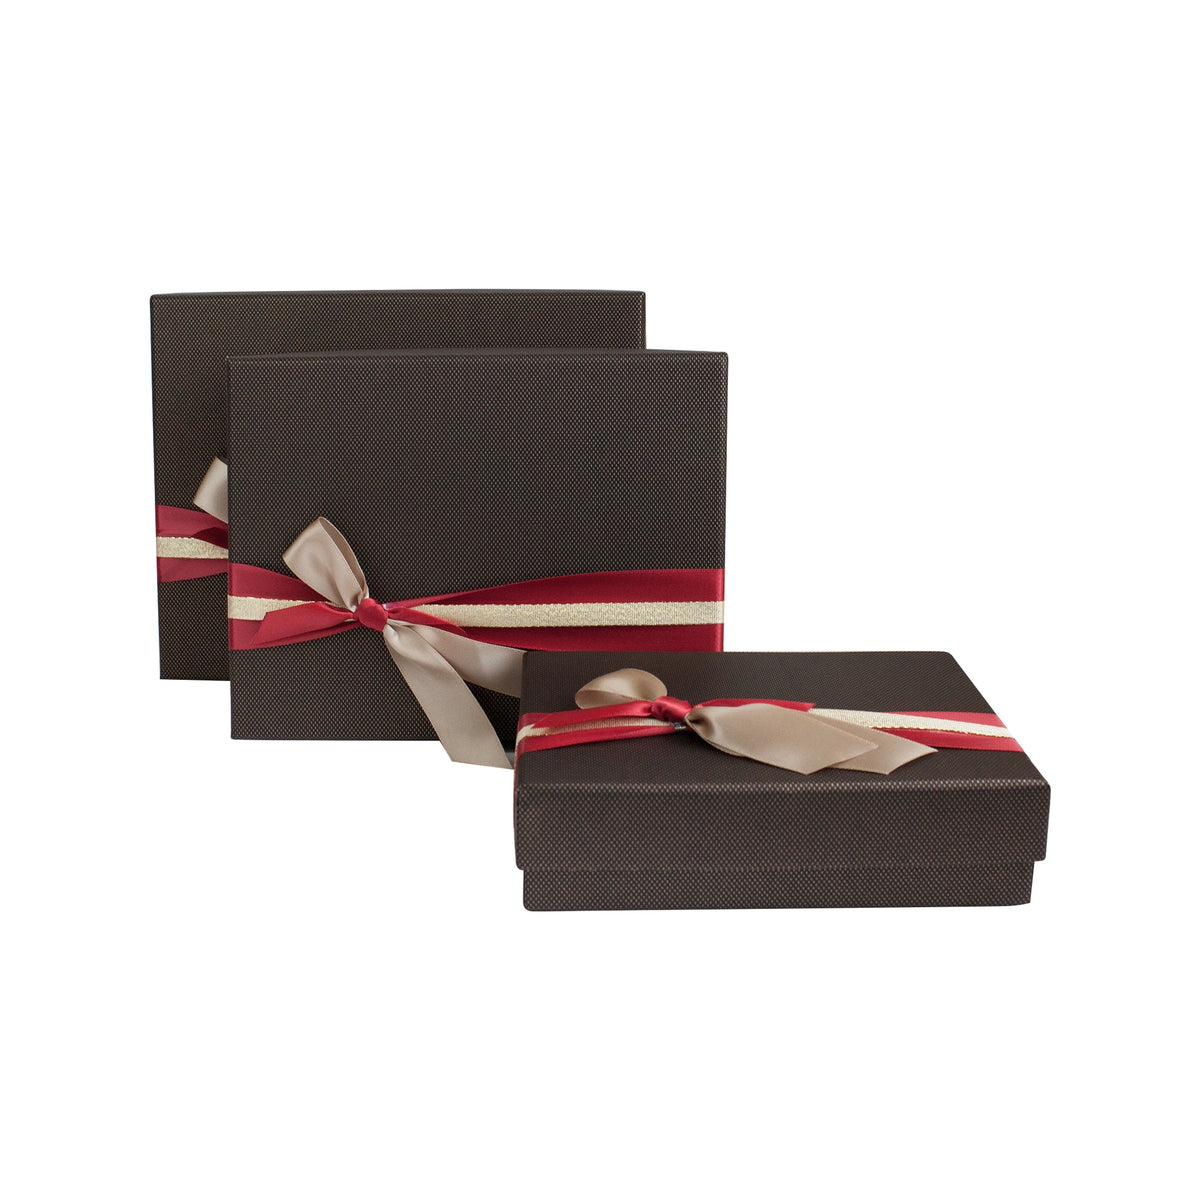 Set of 3 Brown Gold Bow Gift Boxes (Sizes Available)